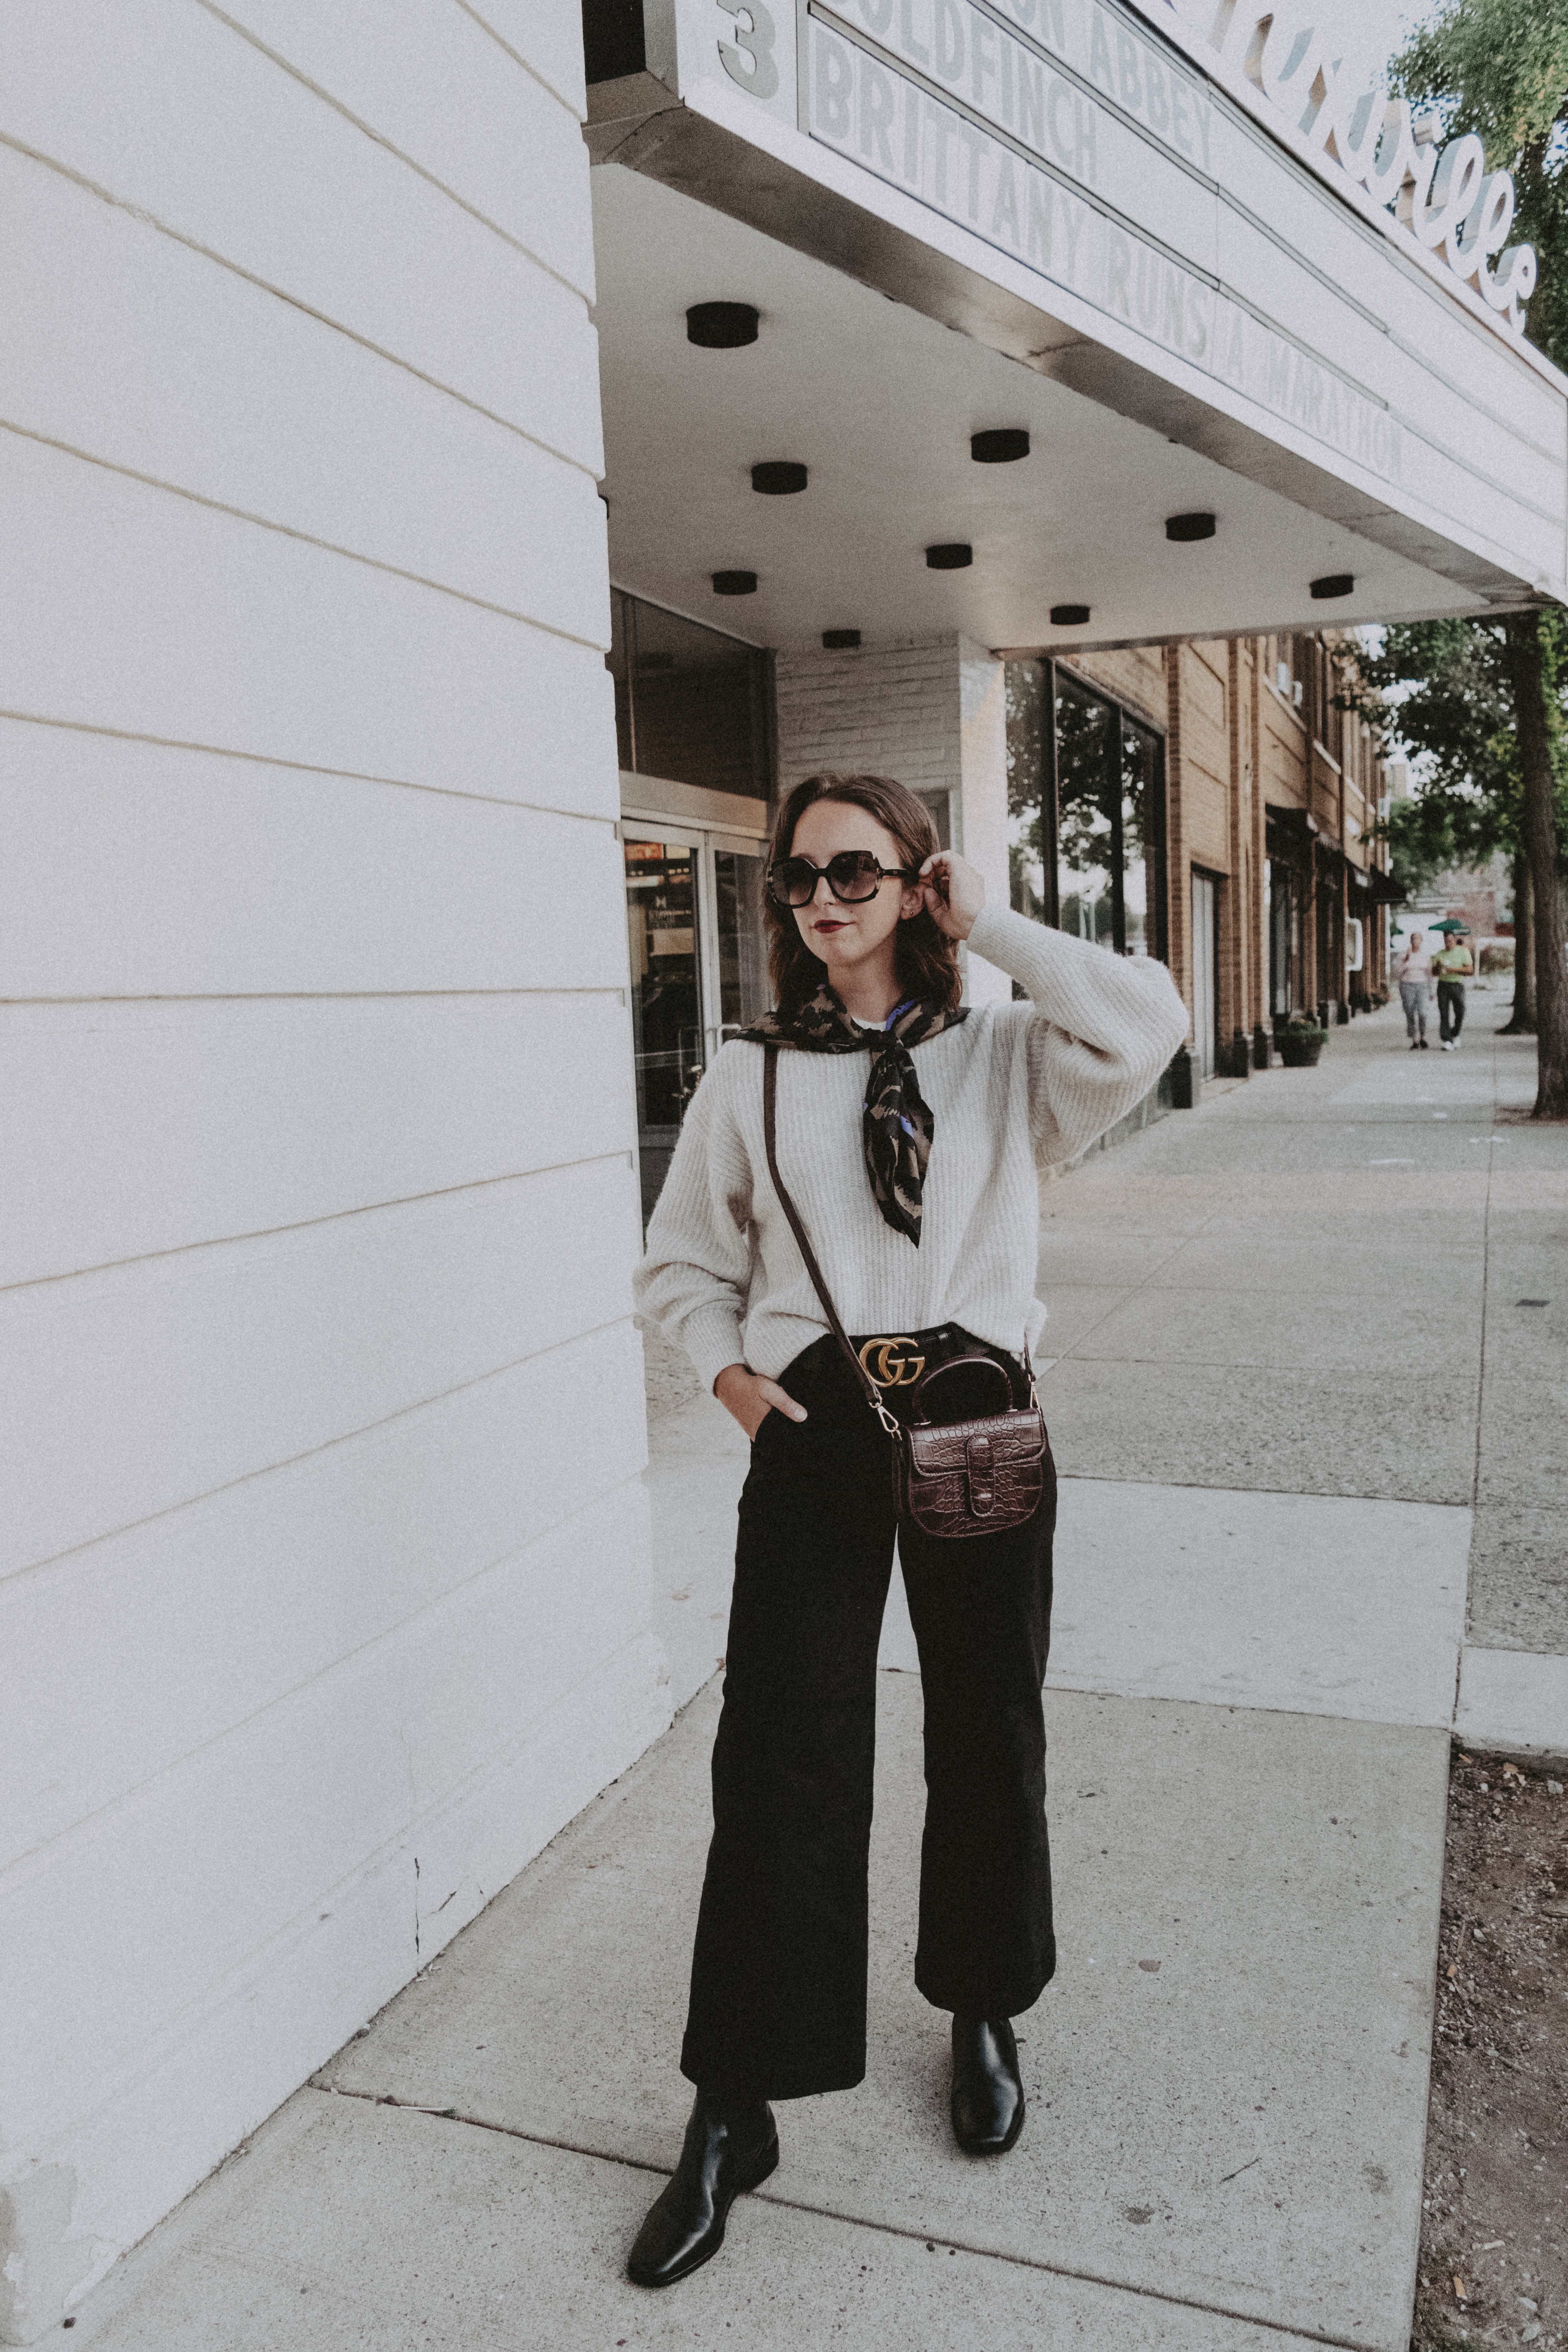 3 Easy Fashionable Ways To Be A More Ethical Consumer - everlane - dvf - bloomingdales - fall fashion - street style #everlane #fall #fallfashion #falloutfit #fallstyle #ethicalfashion #fashion #outfit #style #boots #streetstyle Simone Piliero - Simply by Simone 